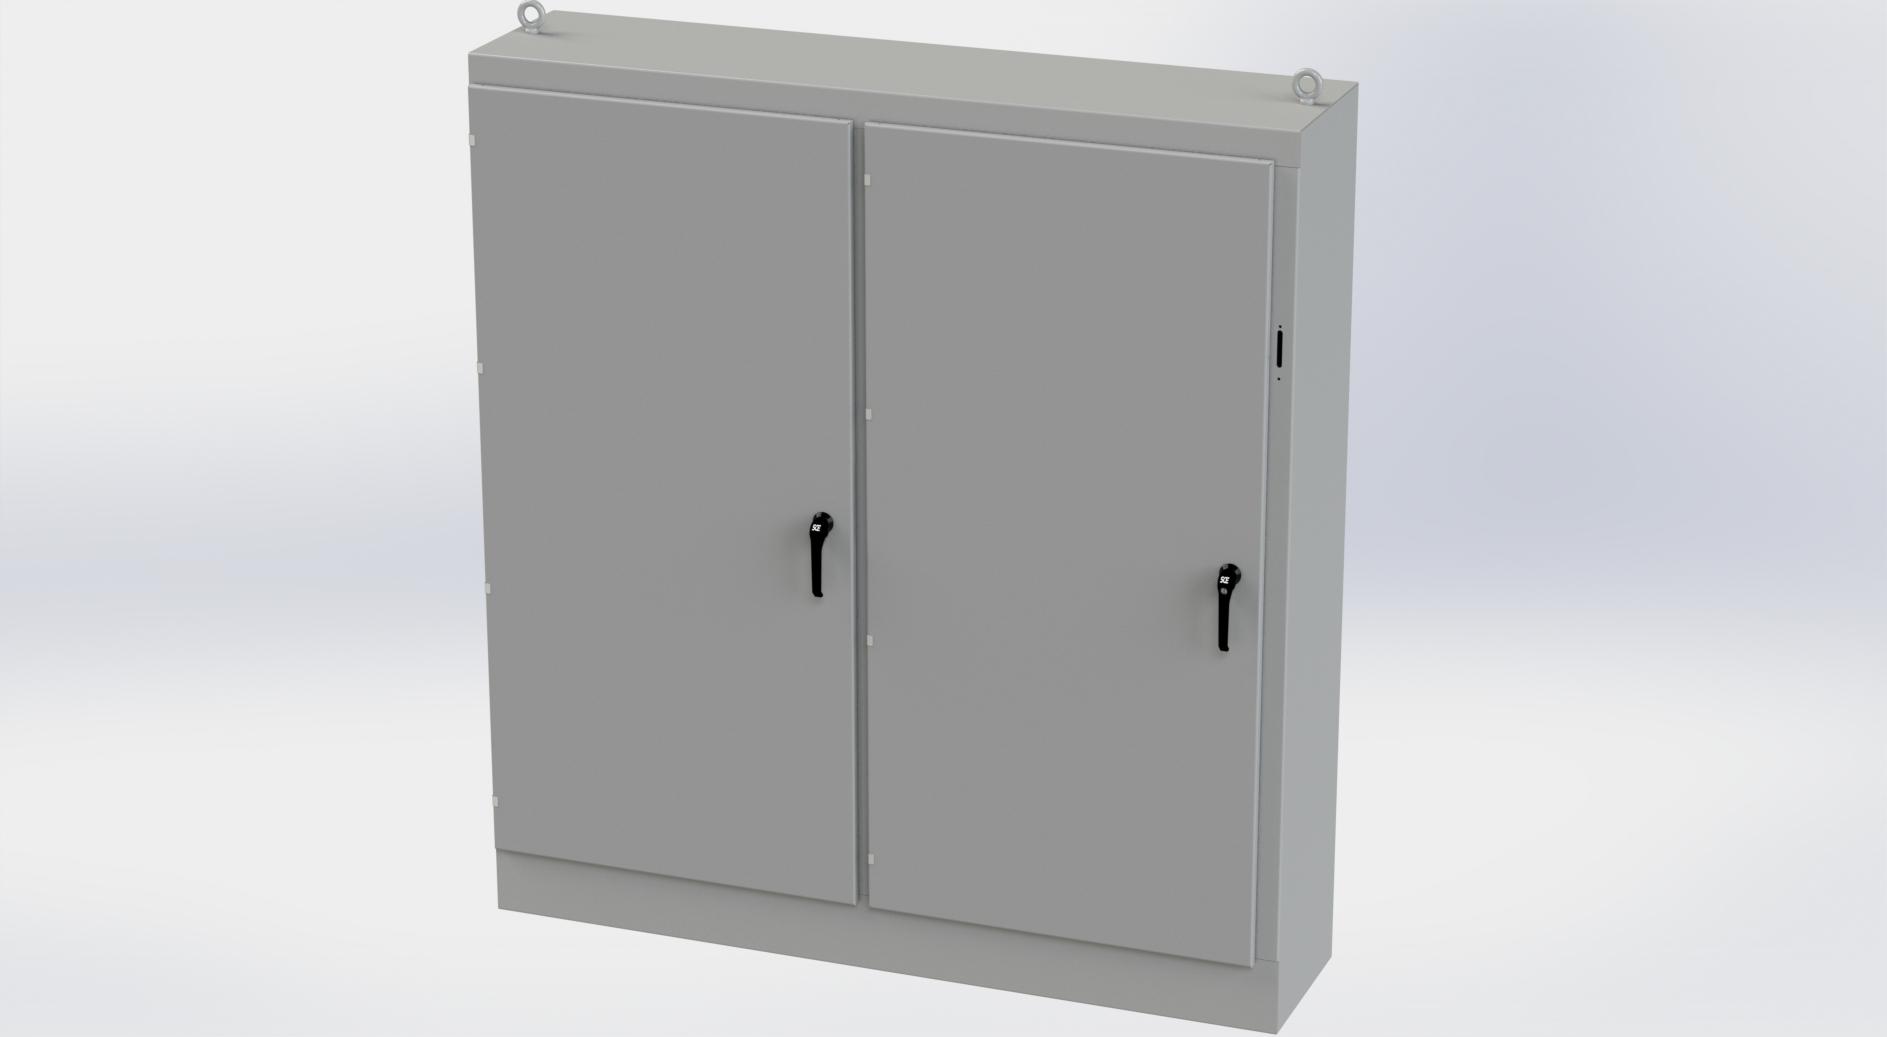 Saginaw Control SCE-84XM7818G 2DR XM Enclosure, Height:84.00", Width:77.75", Depth:18.00", ANSI-61 gray powder coating inside and out. Sub-panels are powder coated white.